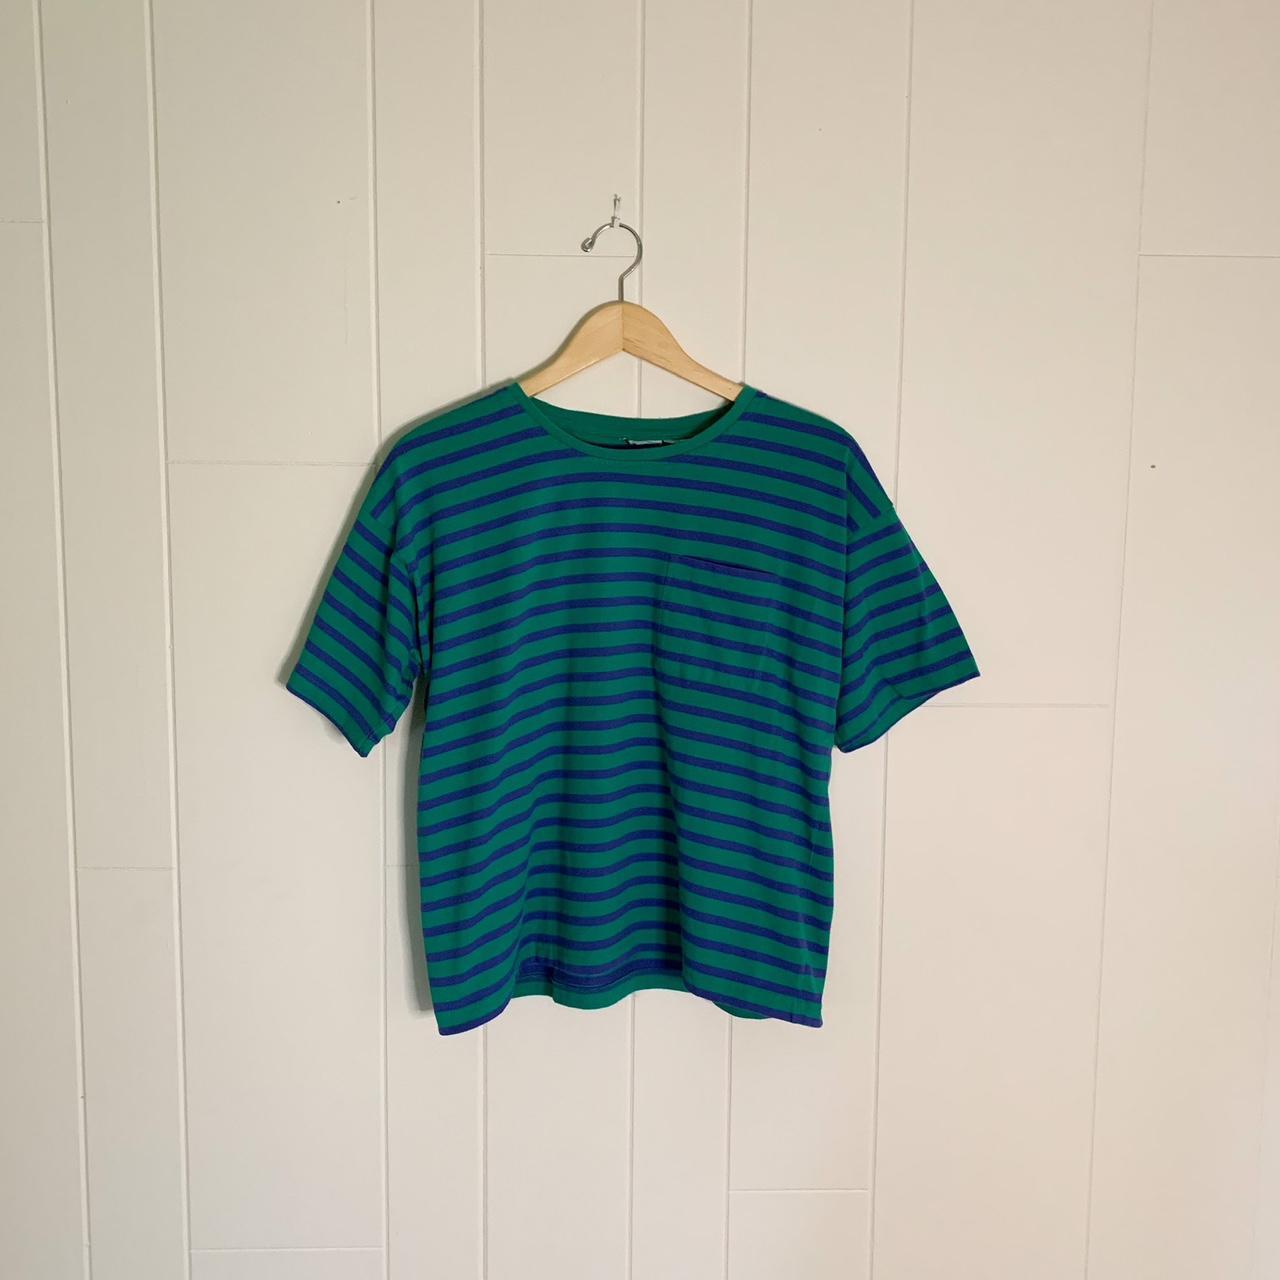 Vintage Teal and Purple Striped Shirt Tag Ripped... - Depop